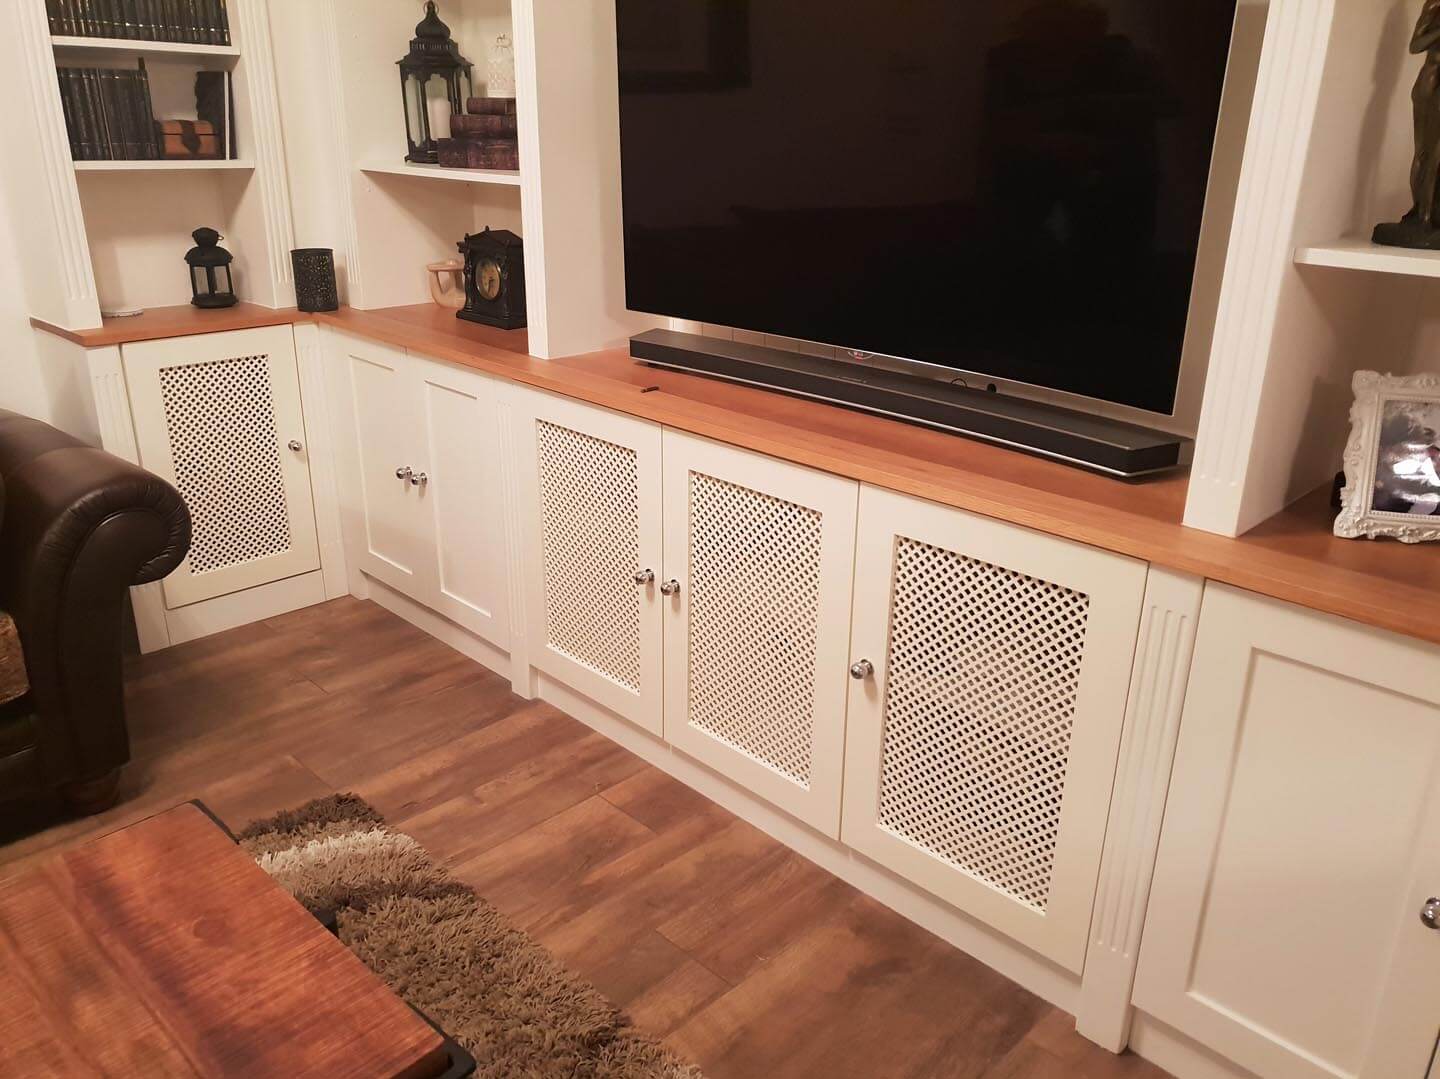 Media Unit with storage cabinets and display shelves